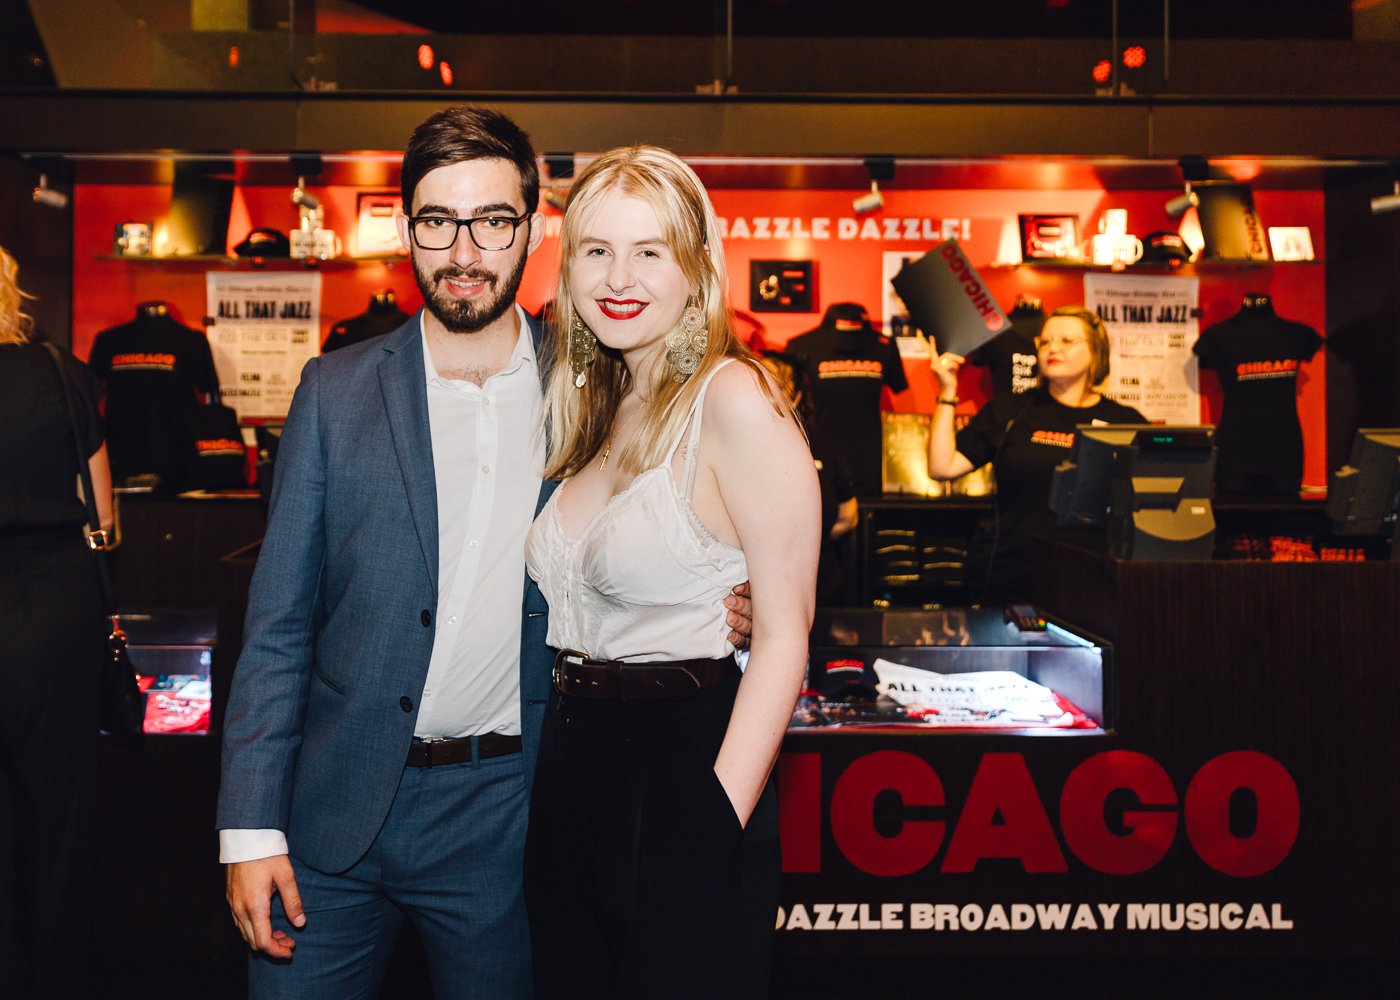 Chicago The Musical opening night